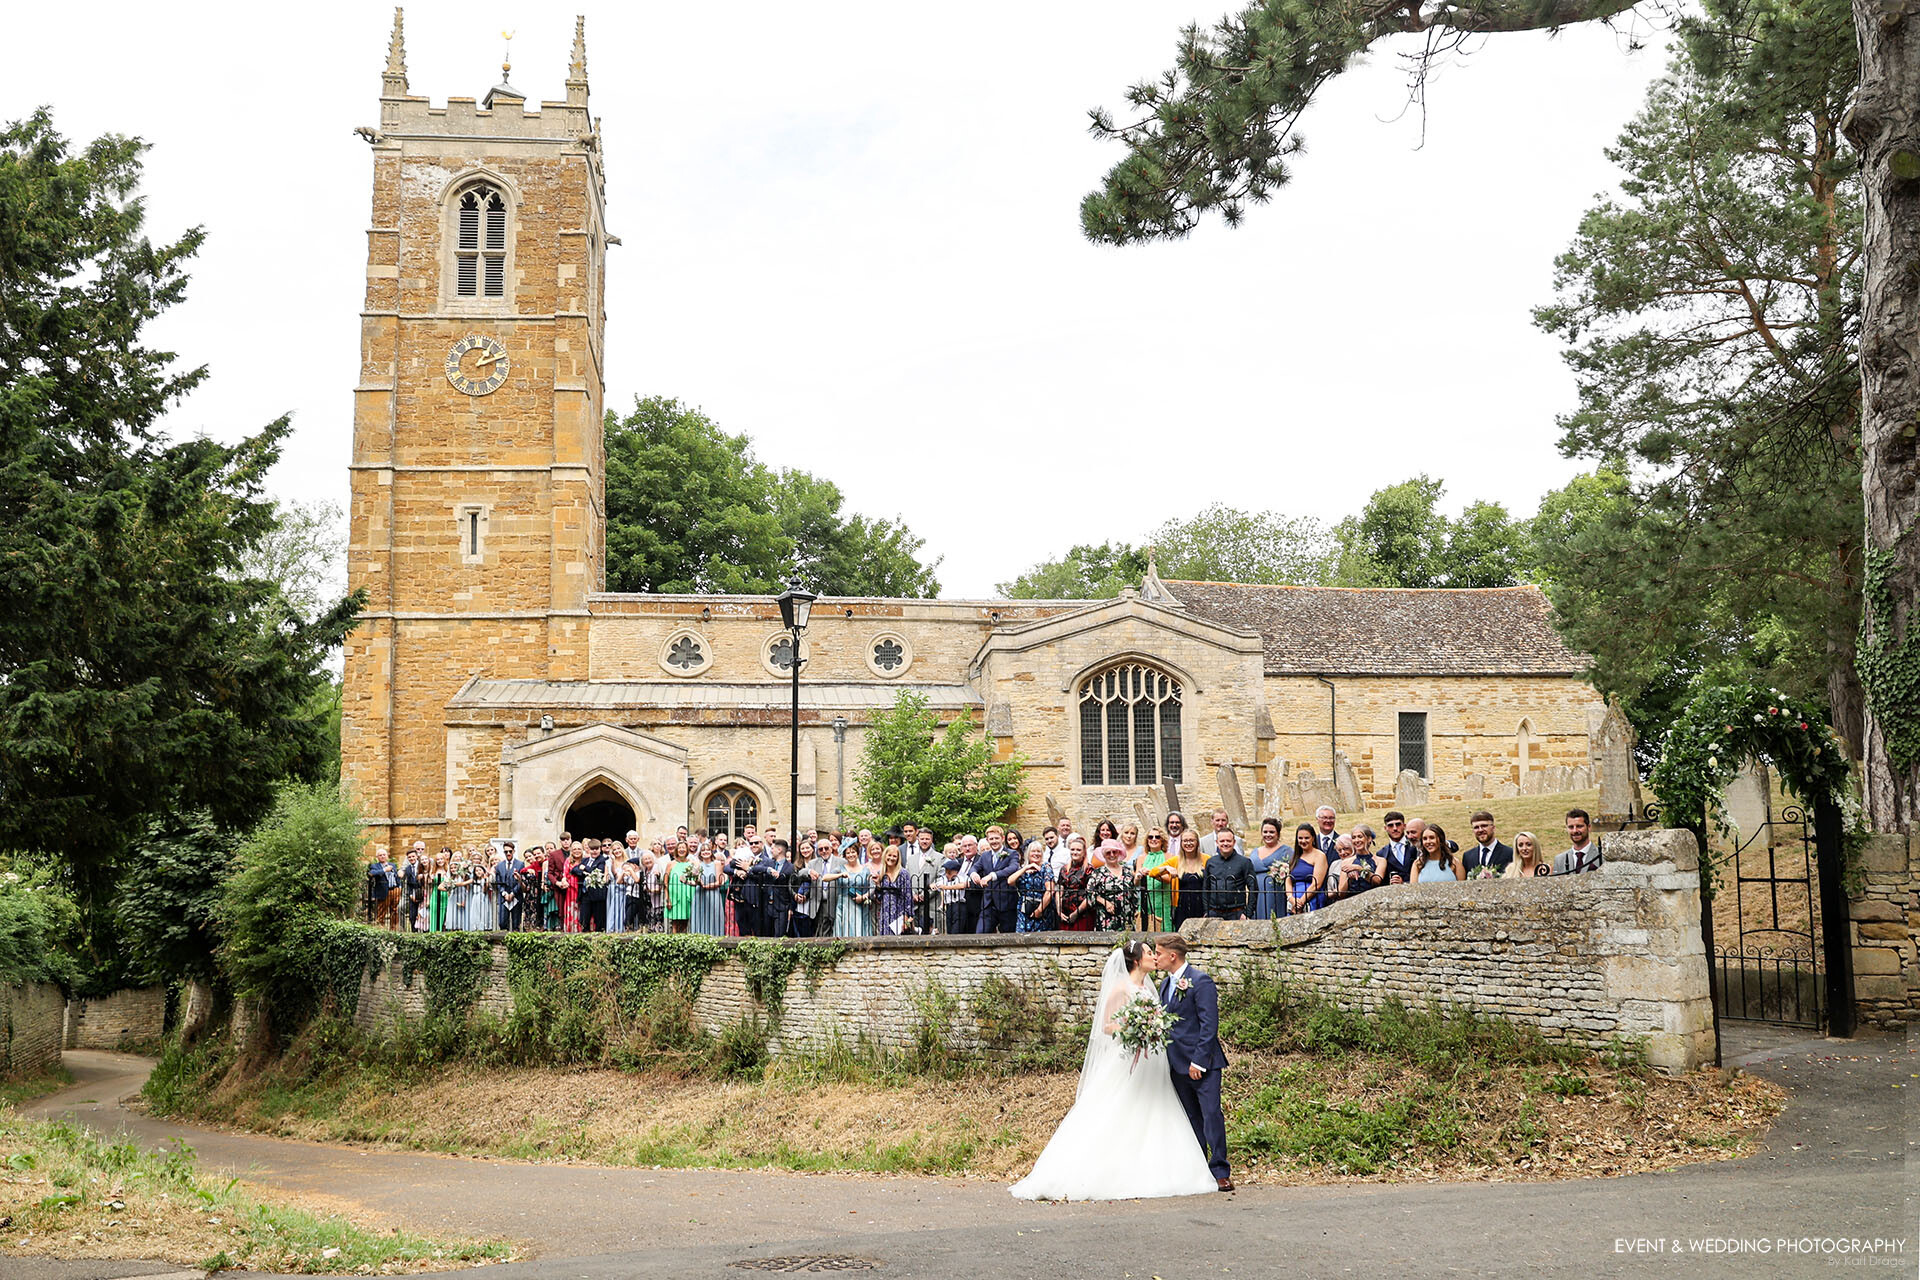 The bride and groom share a kiss on their Gretton Church wedding day as all of their guests line up against the railings, with the church providing the backdrop.